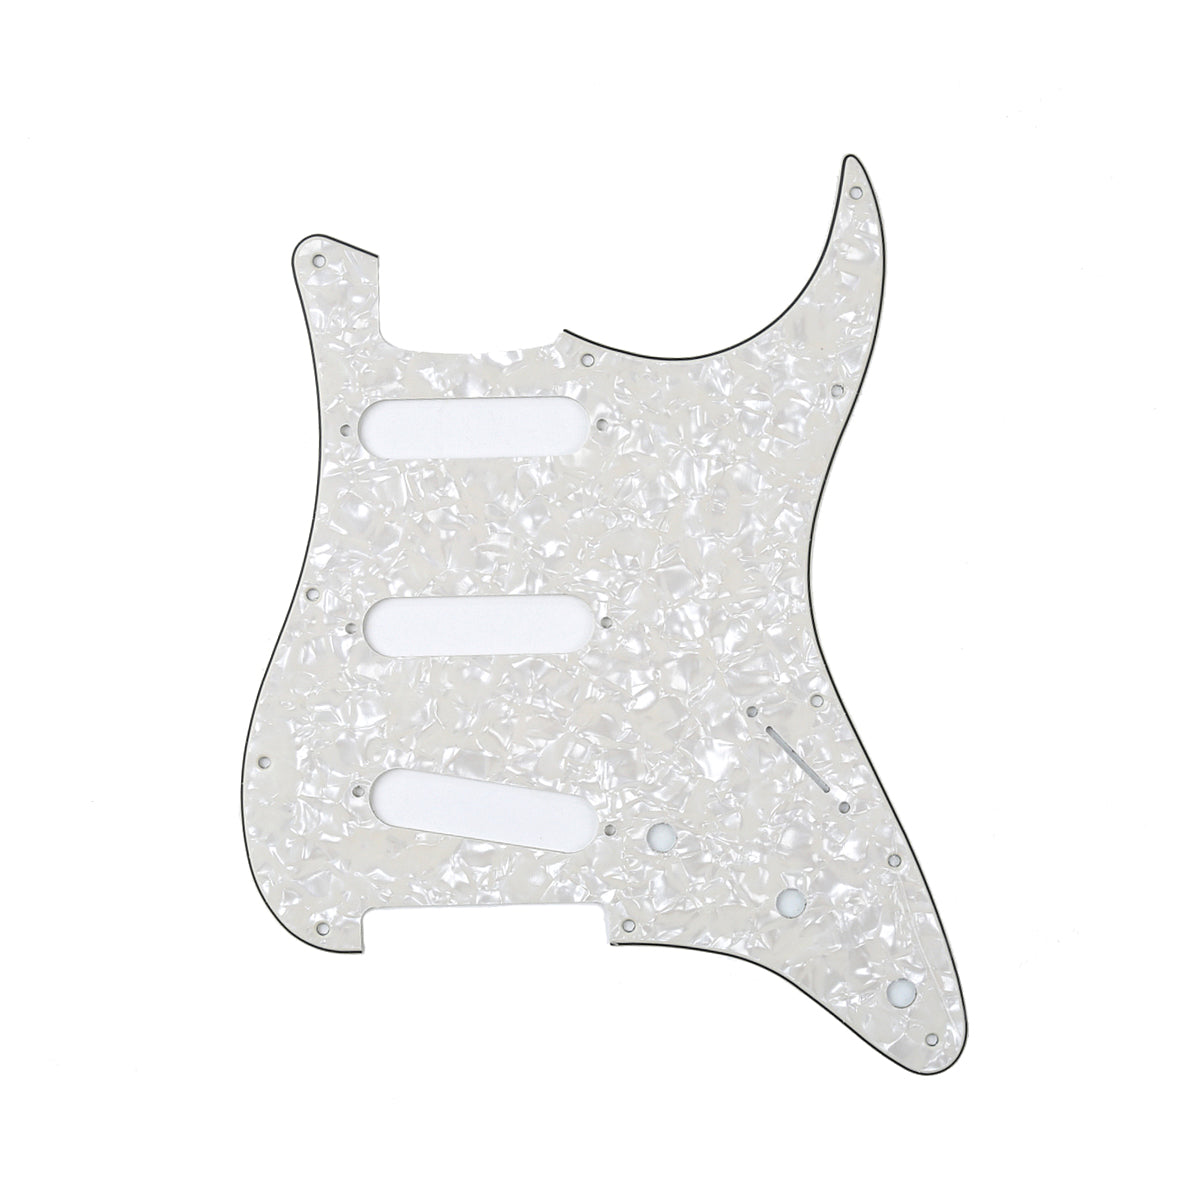 Musiclily SSS 11 Hole Strat Guitar Pickguard for Fender USA/Mexican Made Standard Stratocaster Modern Style, 4Ply Parchment Pearl